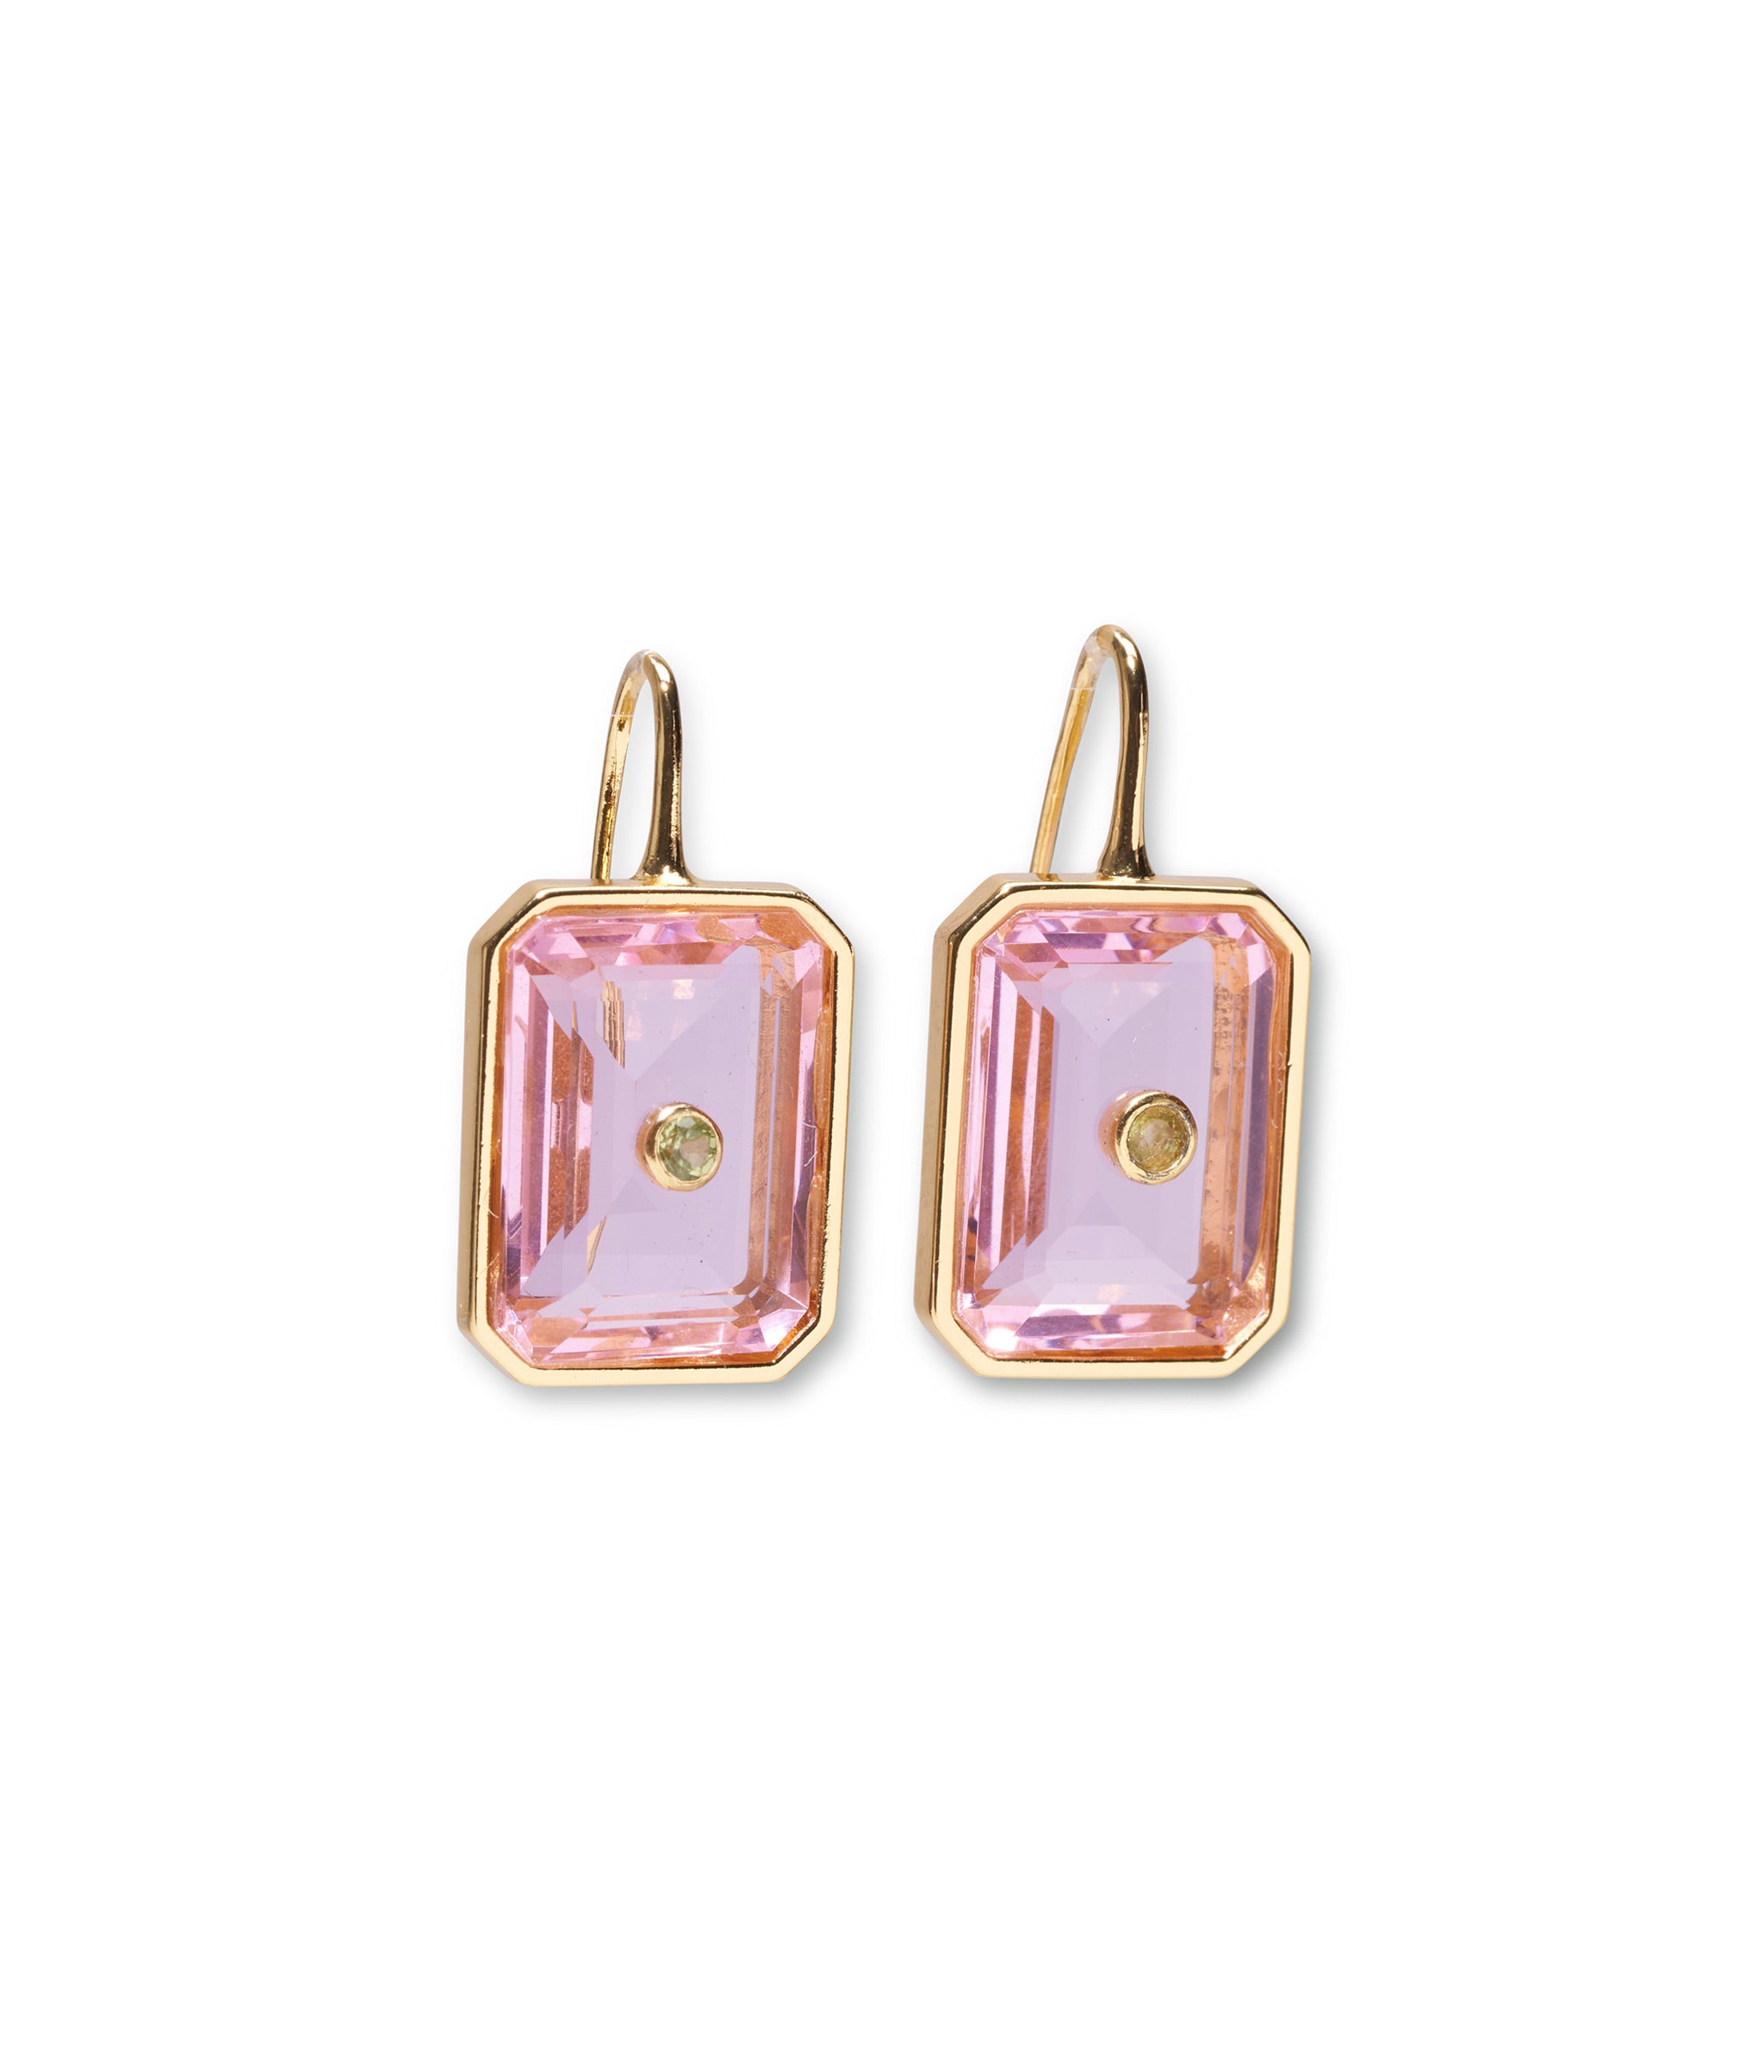 Tile Earrings in Pale Pink. Gold-plated earwires with light pink rectangular glass stones and tiny peridot gems.